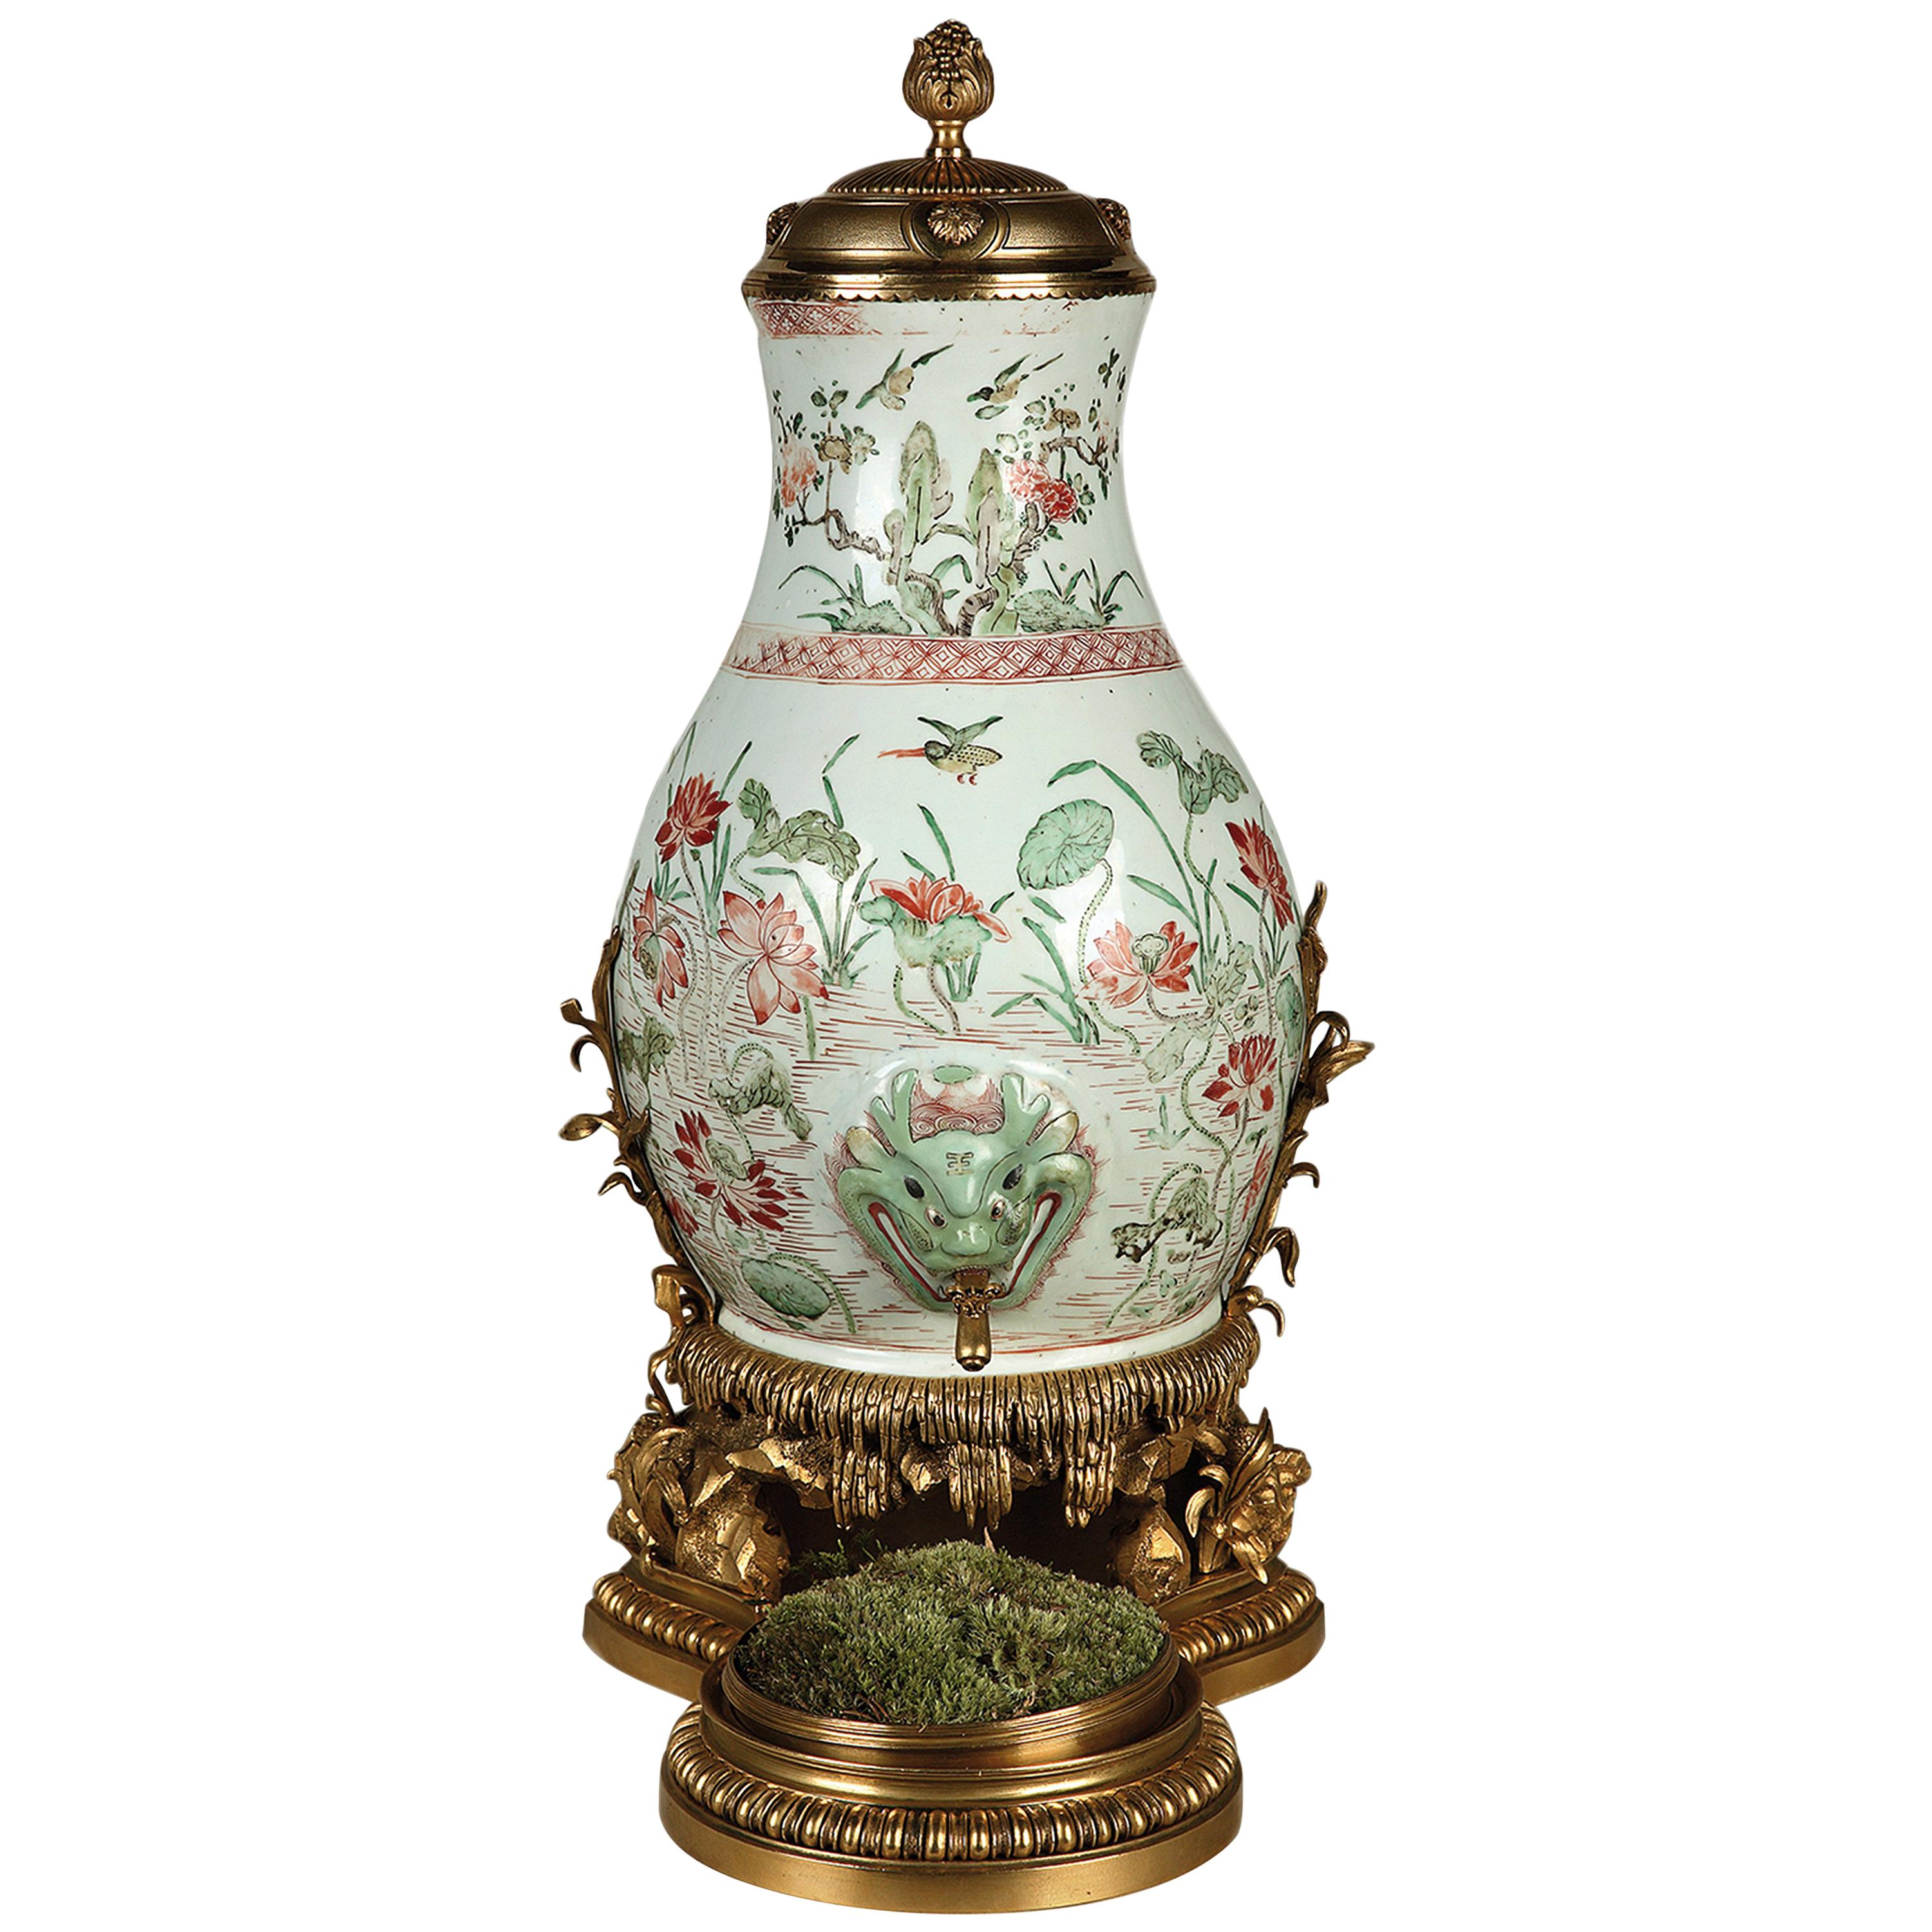 Chinese Porcelain Mural Fountain Attributed to L'Escalier de Cristal, c. 1880 For Sale